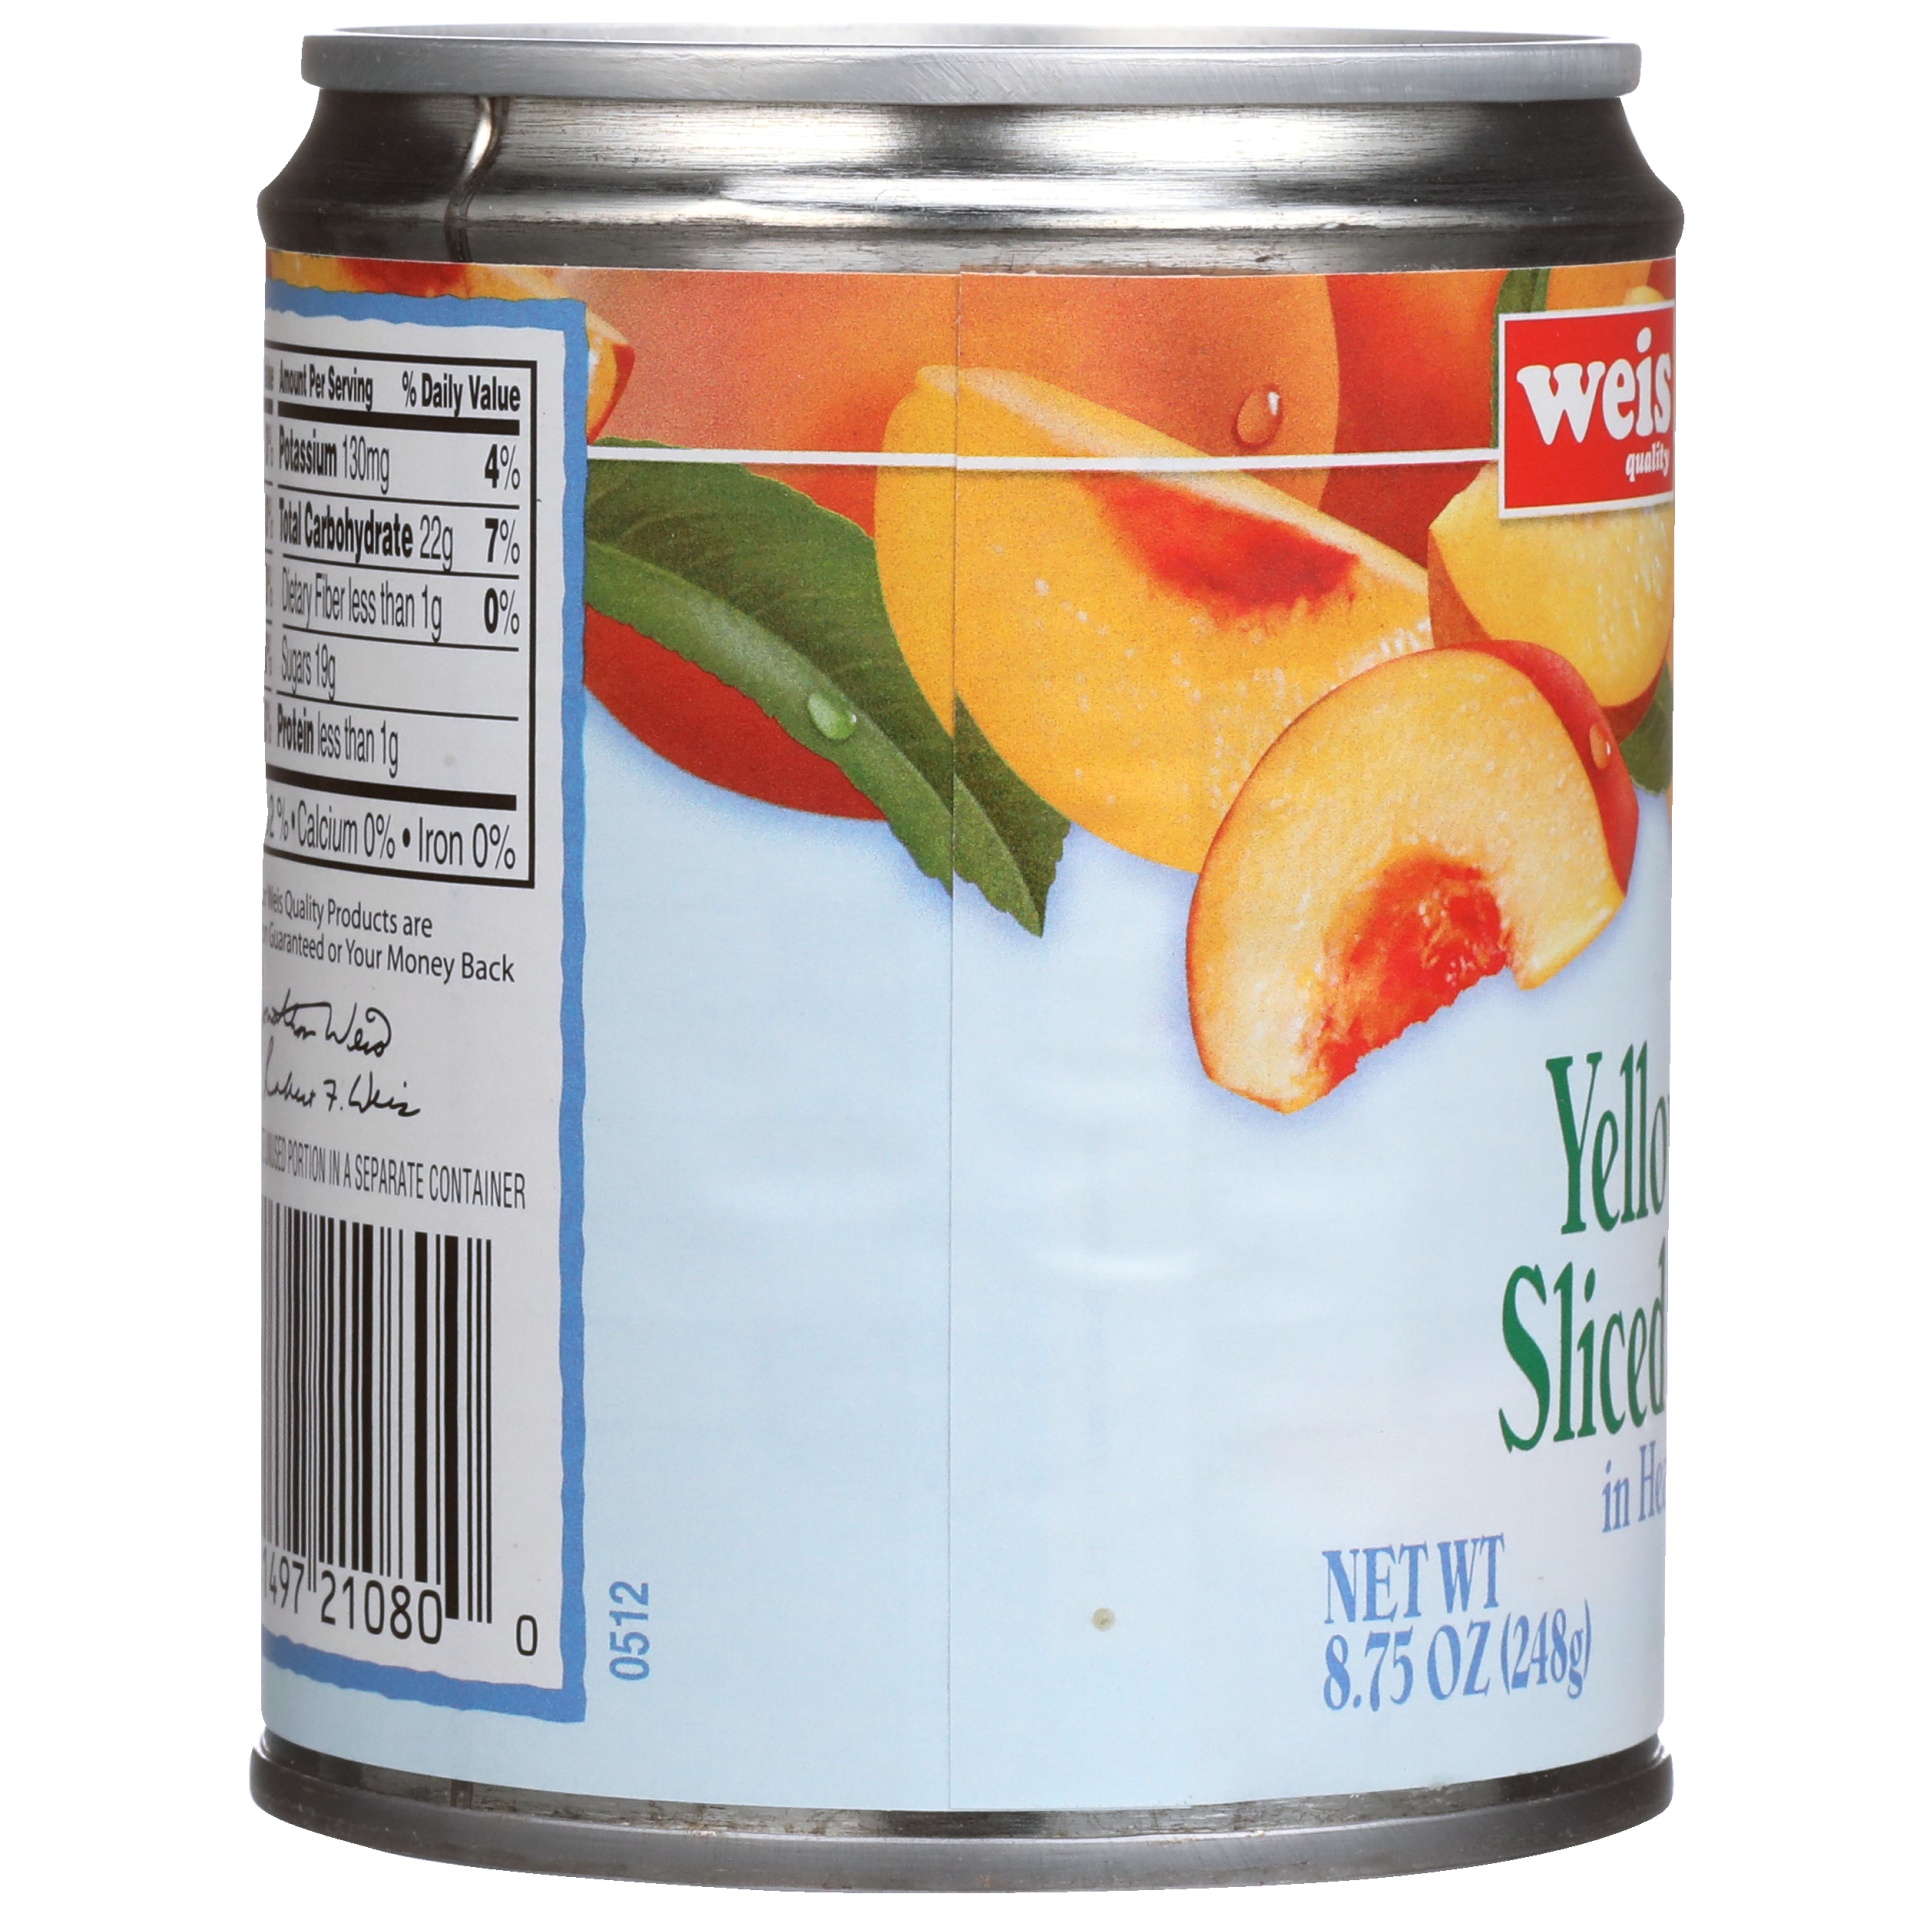 slide 2 of 6, Weis Quality Yellow Cling Sliced Peaches in Heavy Syrup Canned Fruit, 8.75 oz